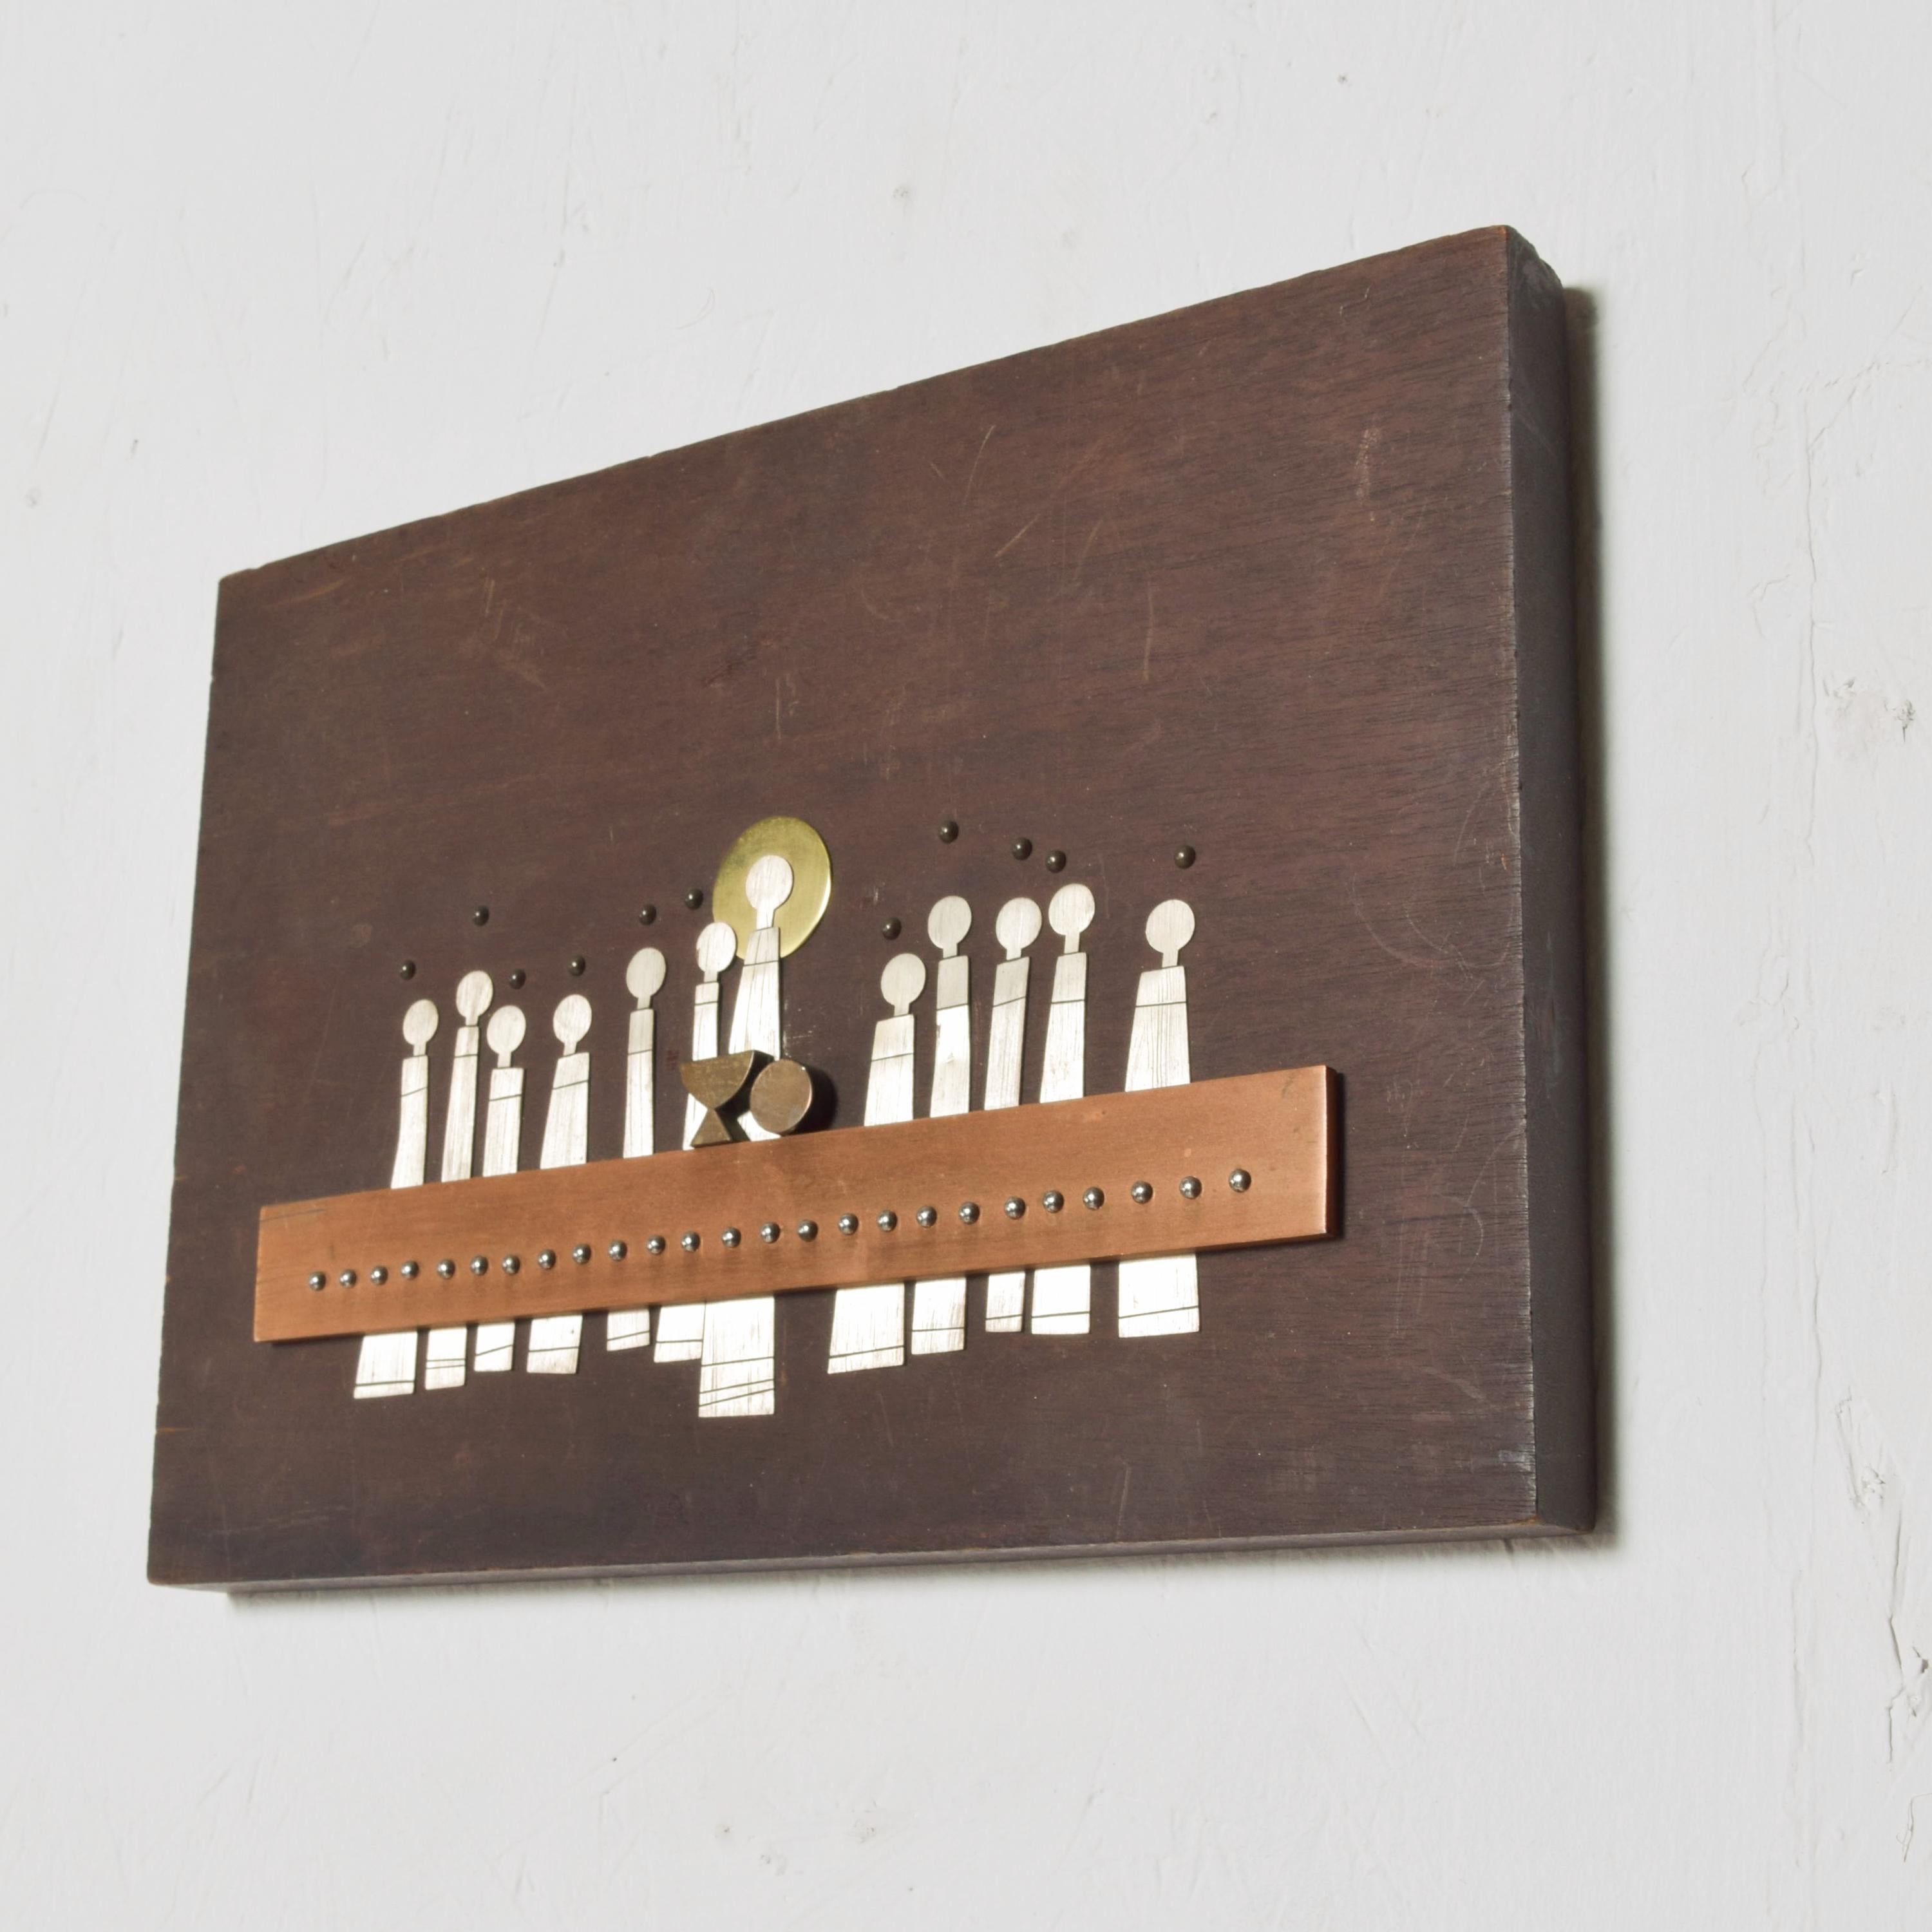 By Talleres Monasticos Last Supper religious plaque in solid mahogany. Made in Mexico, 1970s.
Talleres Monasticos is the workshop for the Emaus Benedictine Monks in Cuernavaca, Mexico
 Depicted is a modernist interpretation of the Last Supper.